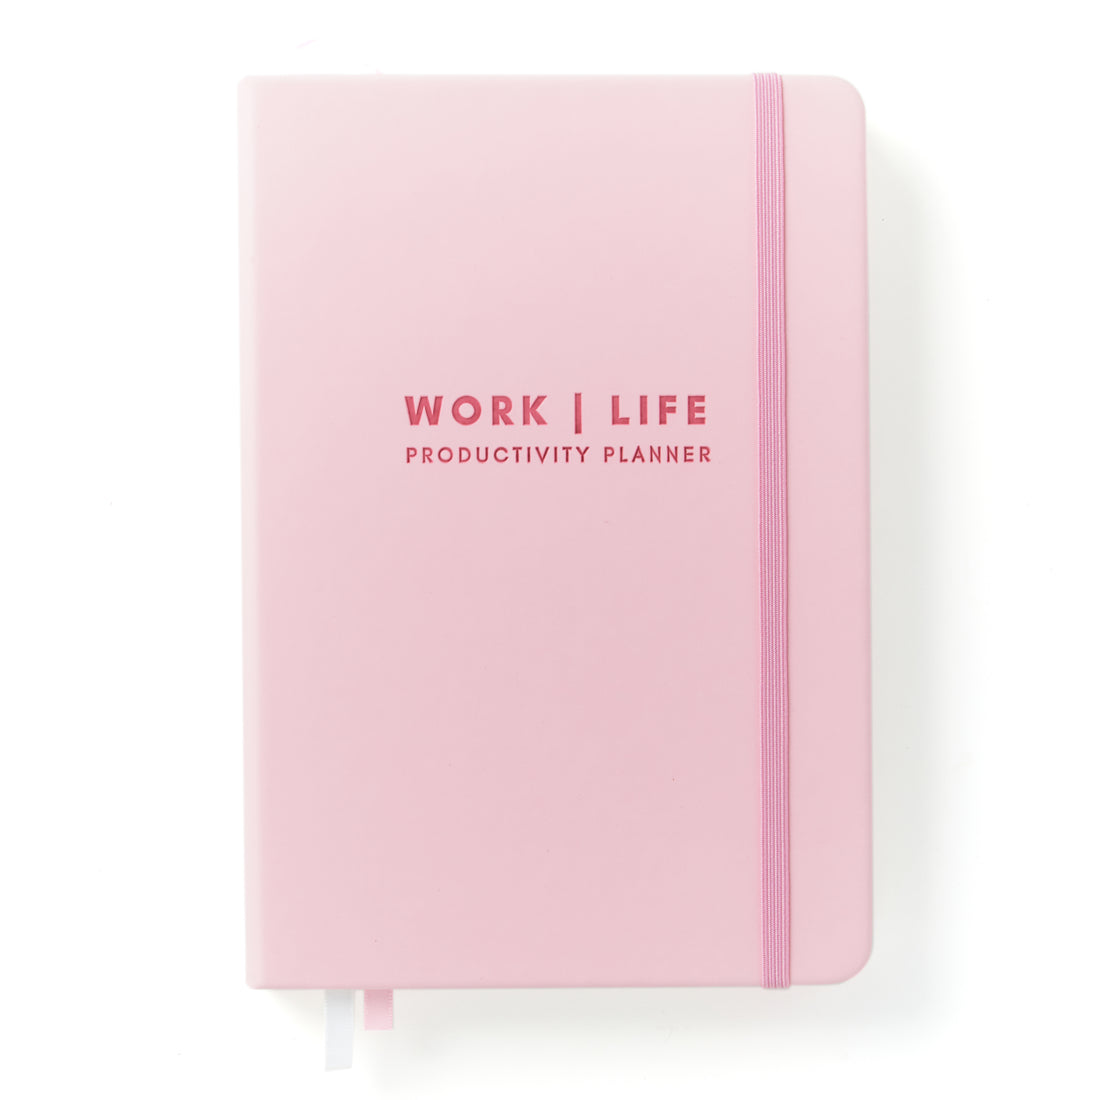 Dominate Your Productivity with an Effective Productivity Planner